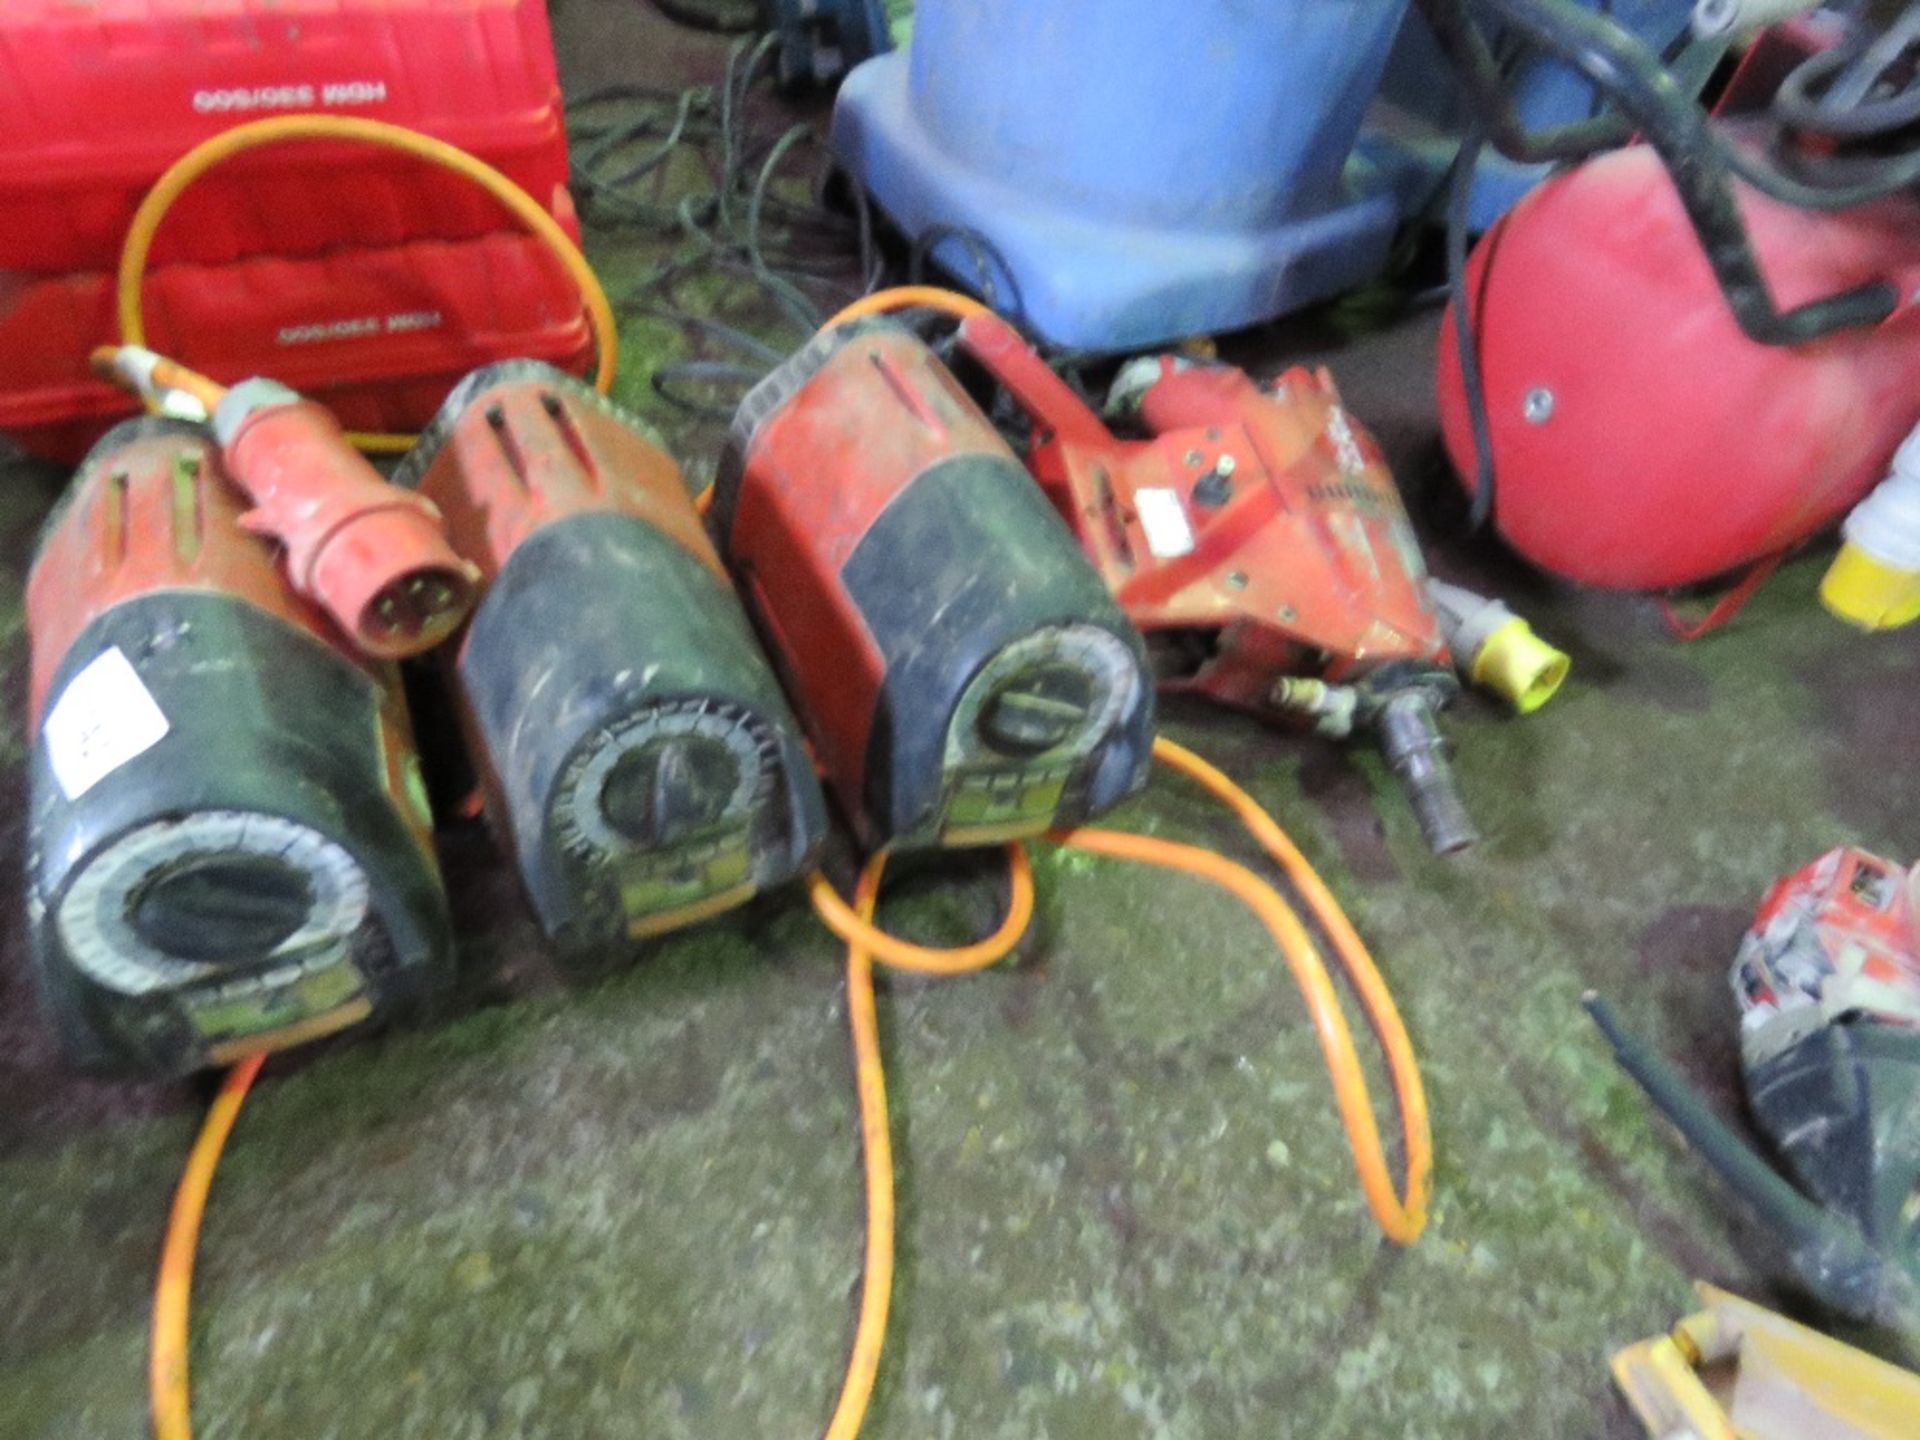 4 X HILTI DIAMOND DRILL HEADS FOR SPARES/REPAIR. - Image 4 of 4